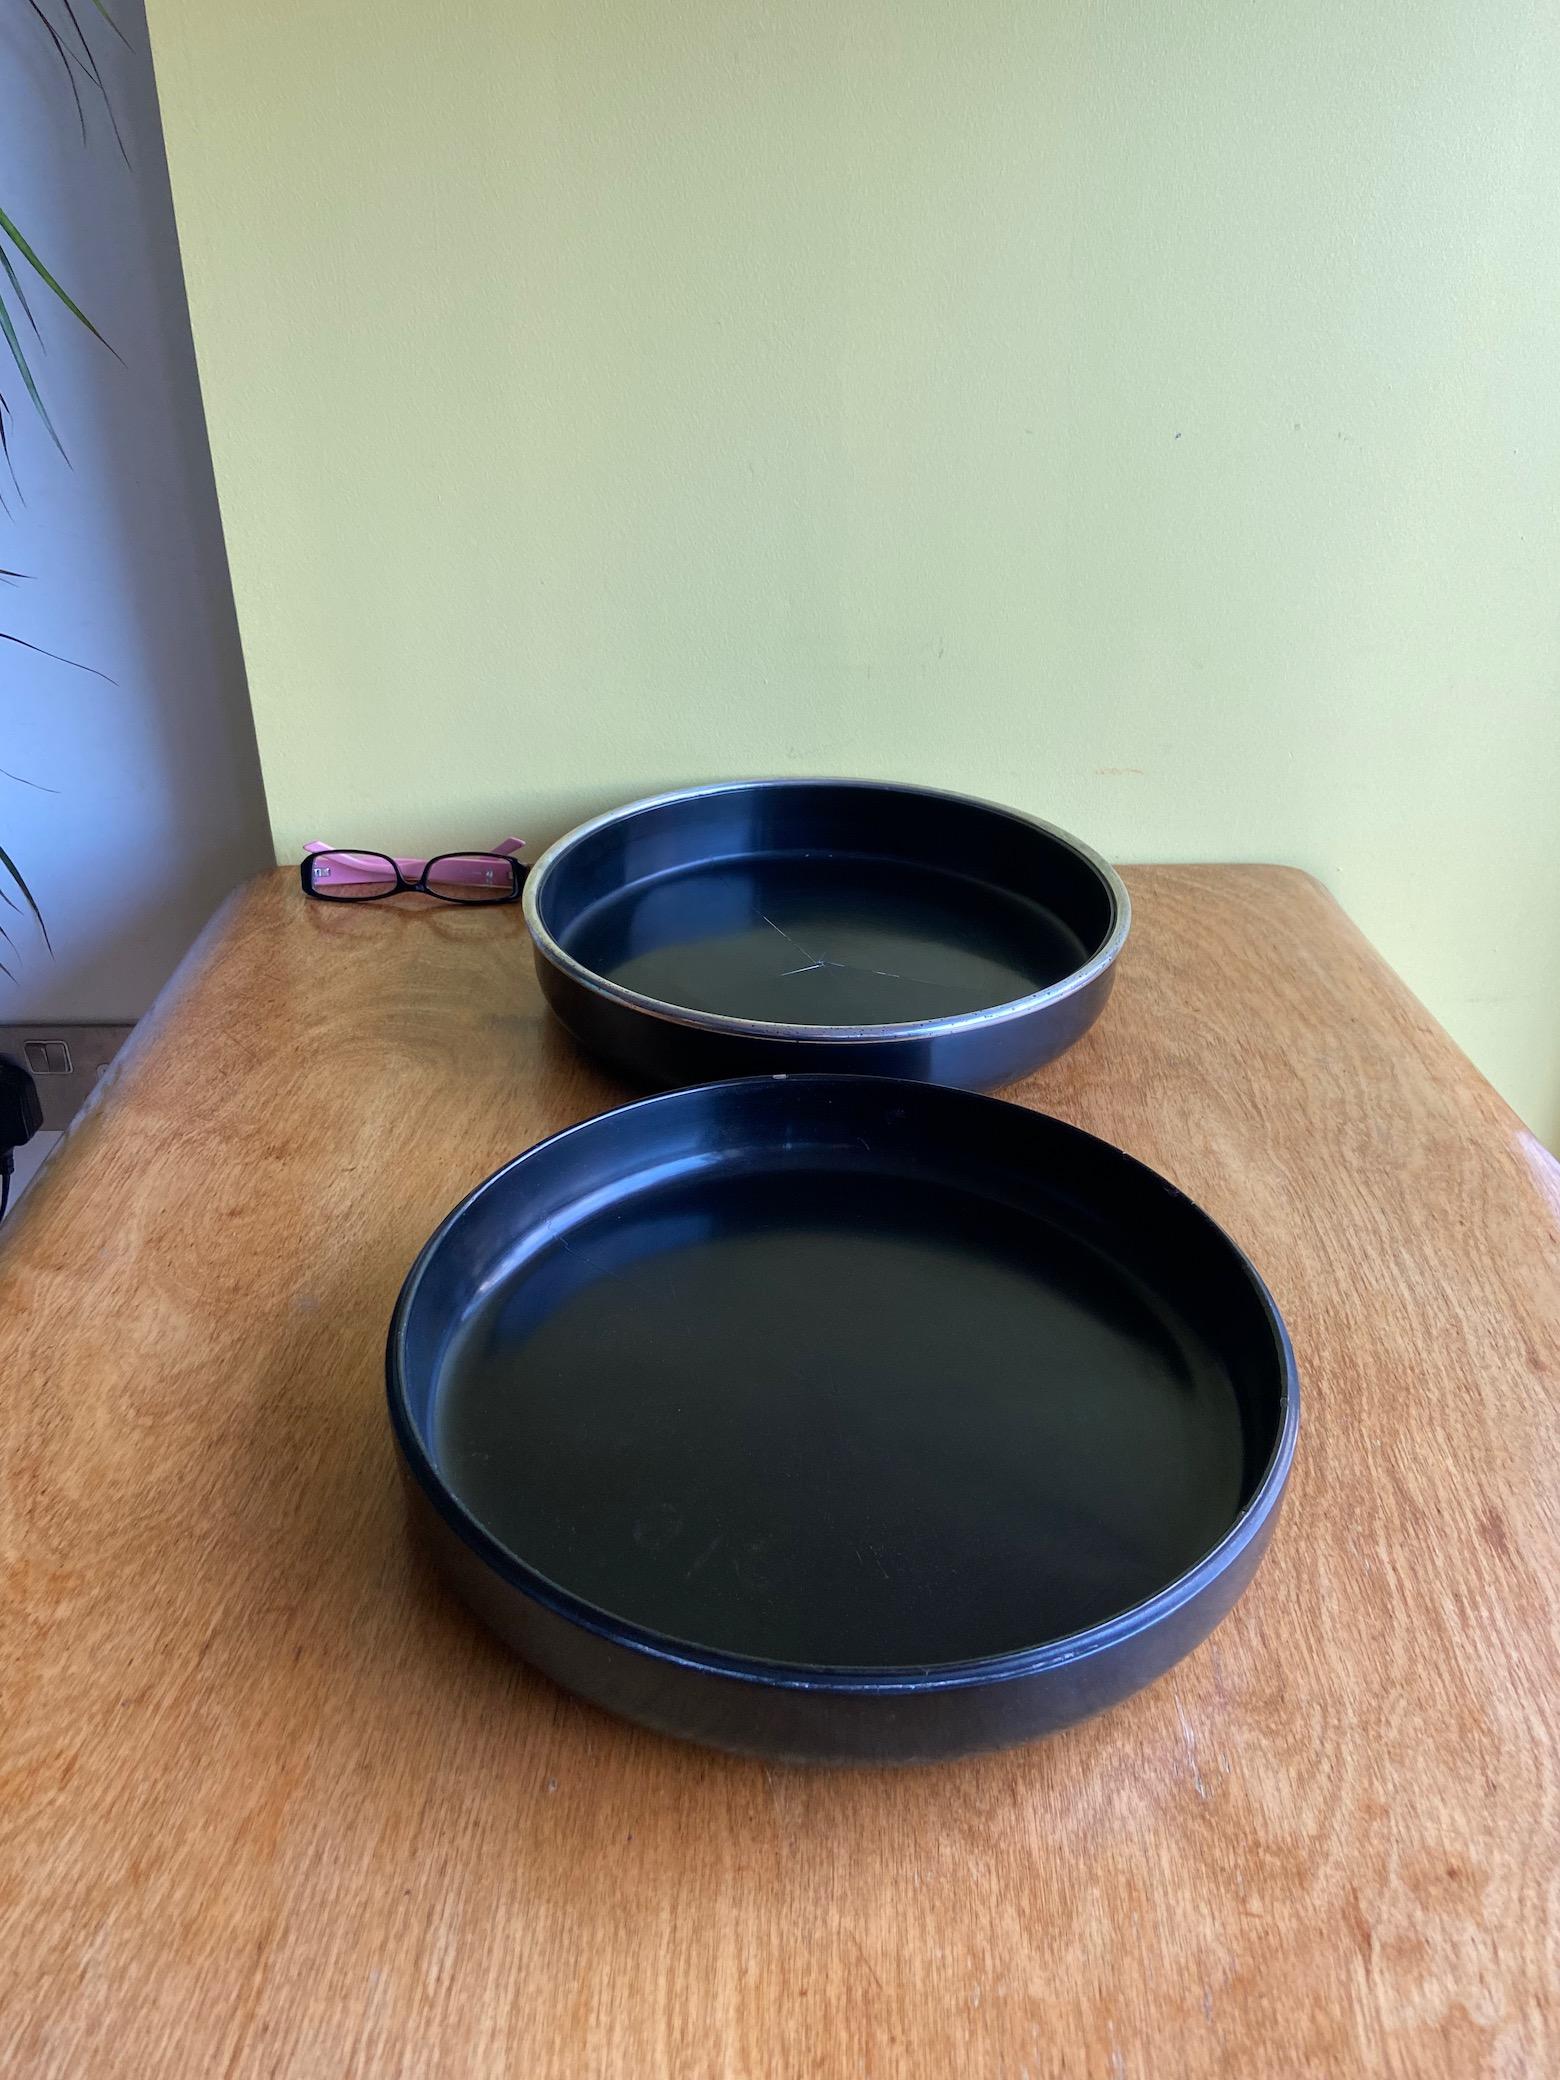 A rare and precious set of 2 black ebonised boxes / containers designed by Gianfranco Frattini and crafted by Pierluigi Ghianda for Progetti 1974 - 1988 , all signed.
solid black bent wood concentric segments and silvered rim, 
the amazing quality